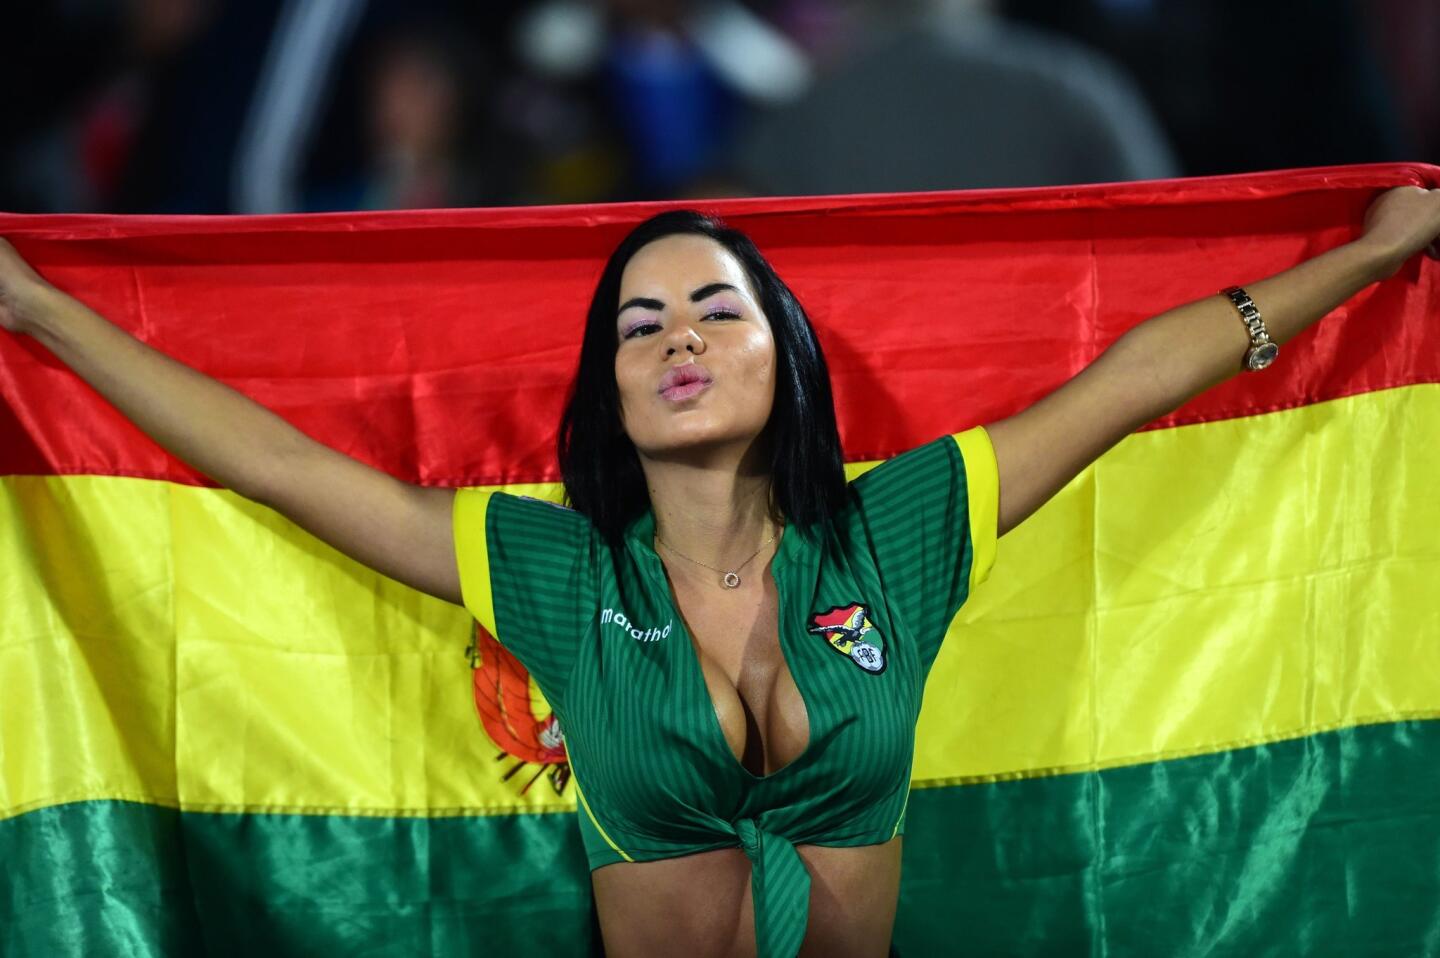 A supporter of Bolivia waits for the start of the 2015 Copa America football championship match between Bolivia and Chile, in Santiago, on June 19, 2015. AFP PHOTO / MARTIN BERNETTIMARTIN BERNETTI/AFP/Getty Images ** OUTS - ELSENT, FPG - OUTS * NM, PH, VA if sourced by CT, LA or MoD **